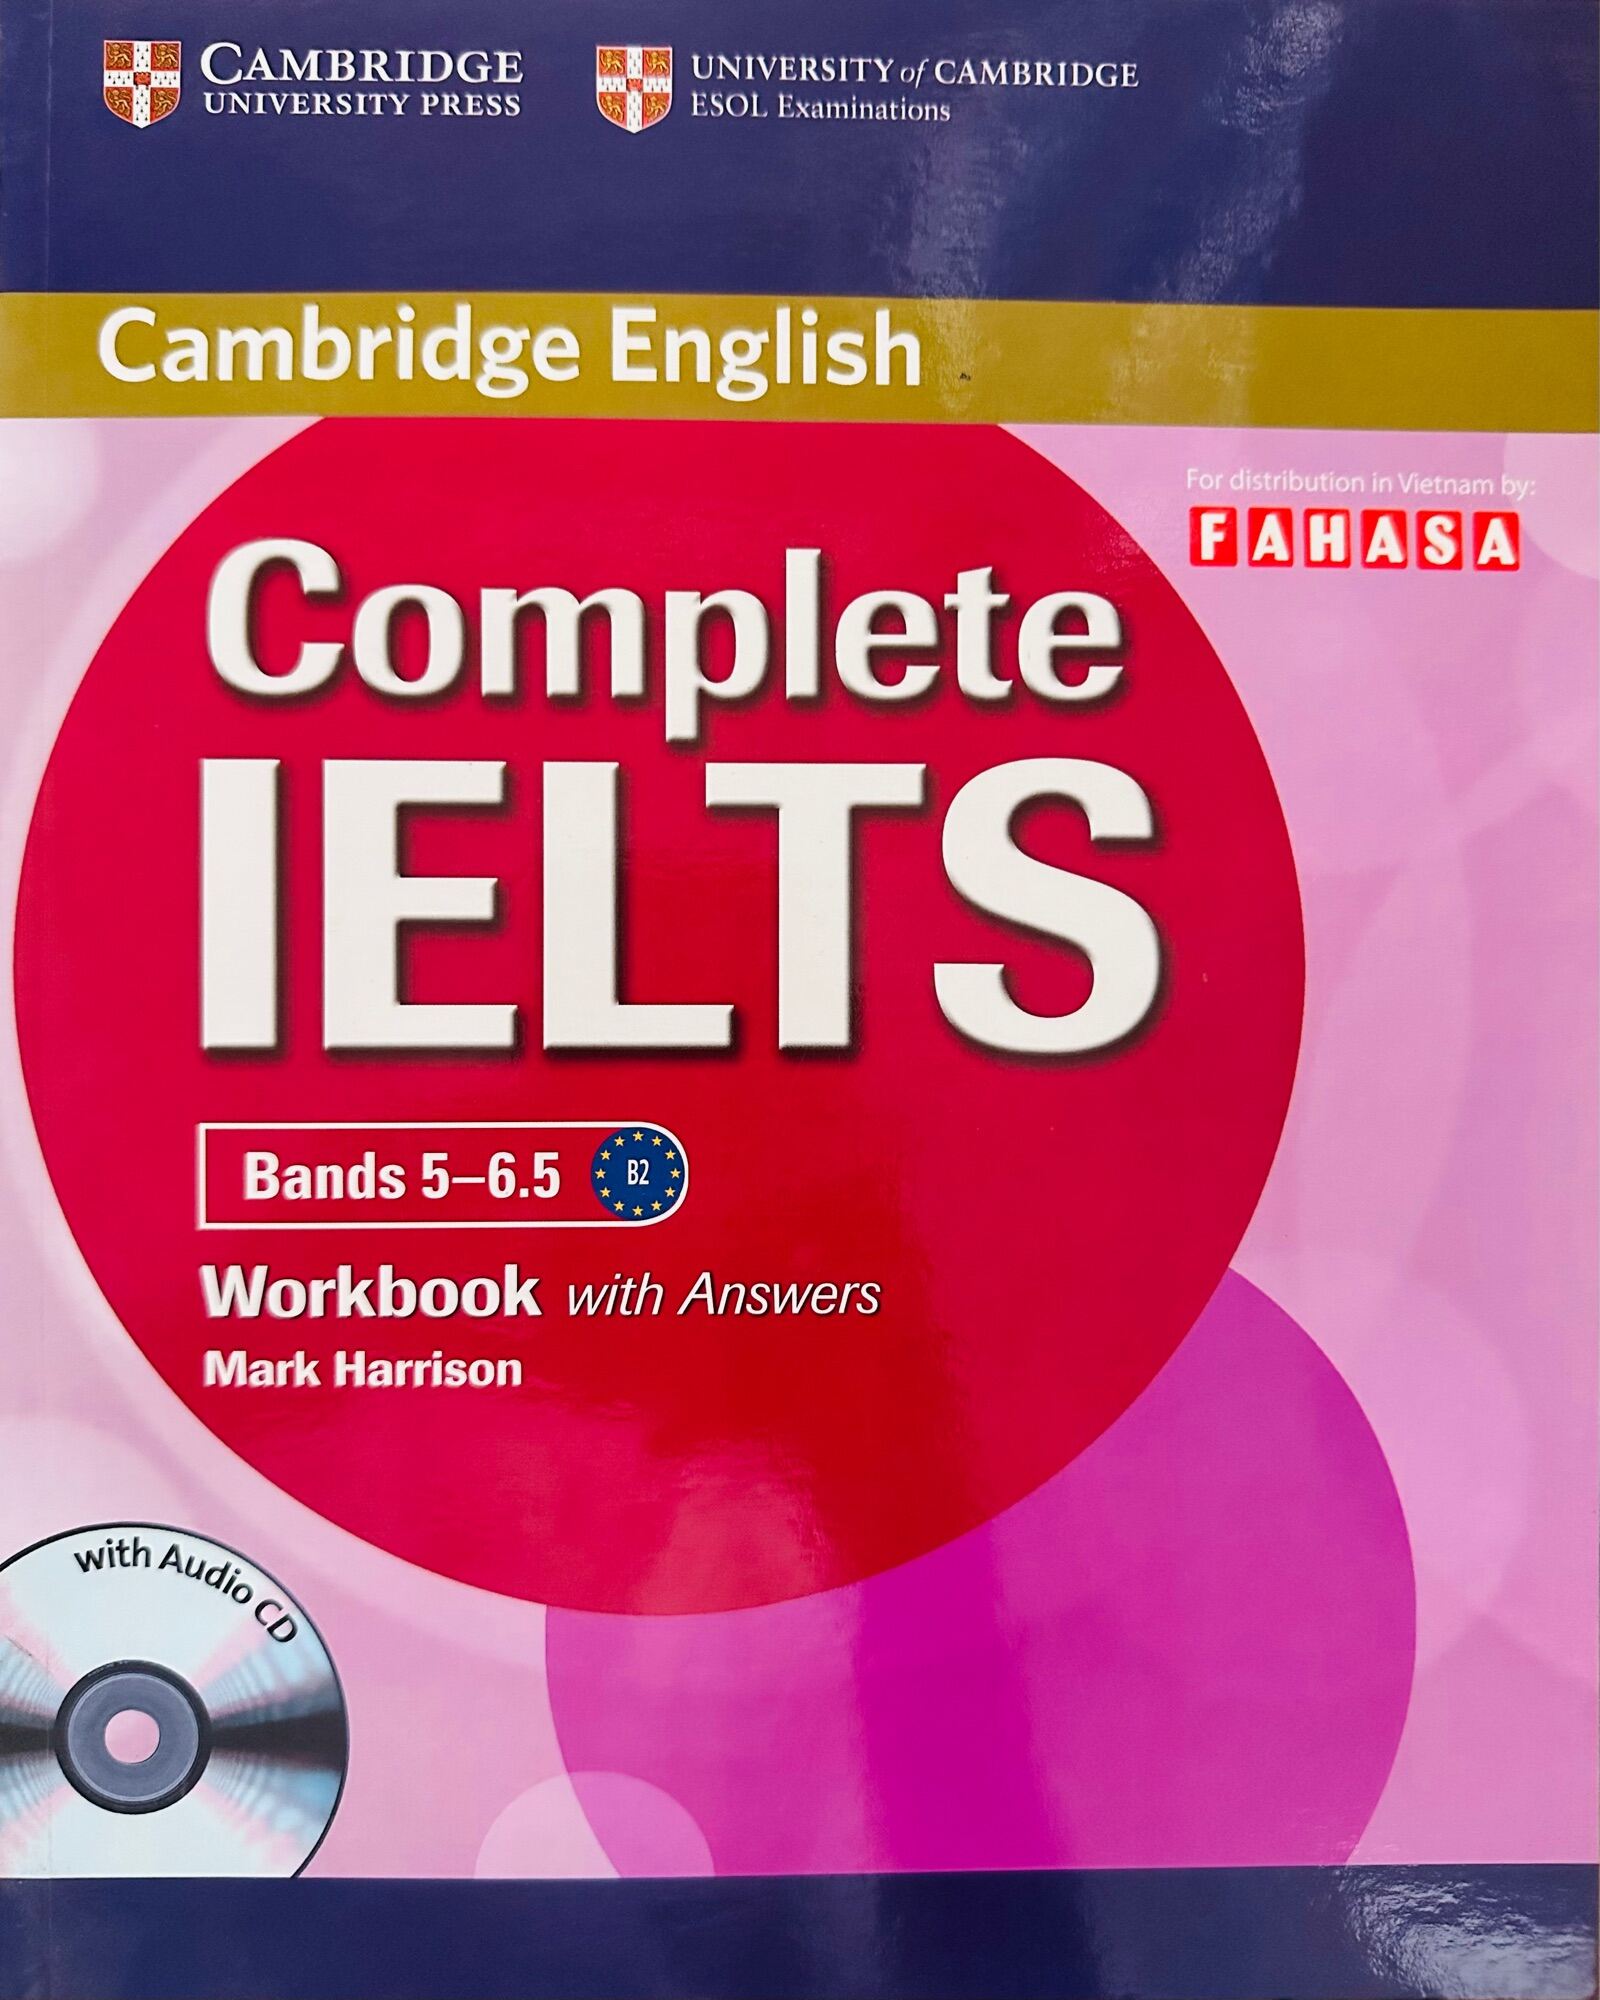 Complete Ielts Band 5-6.5 - Workbook with Audio CD